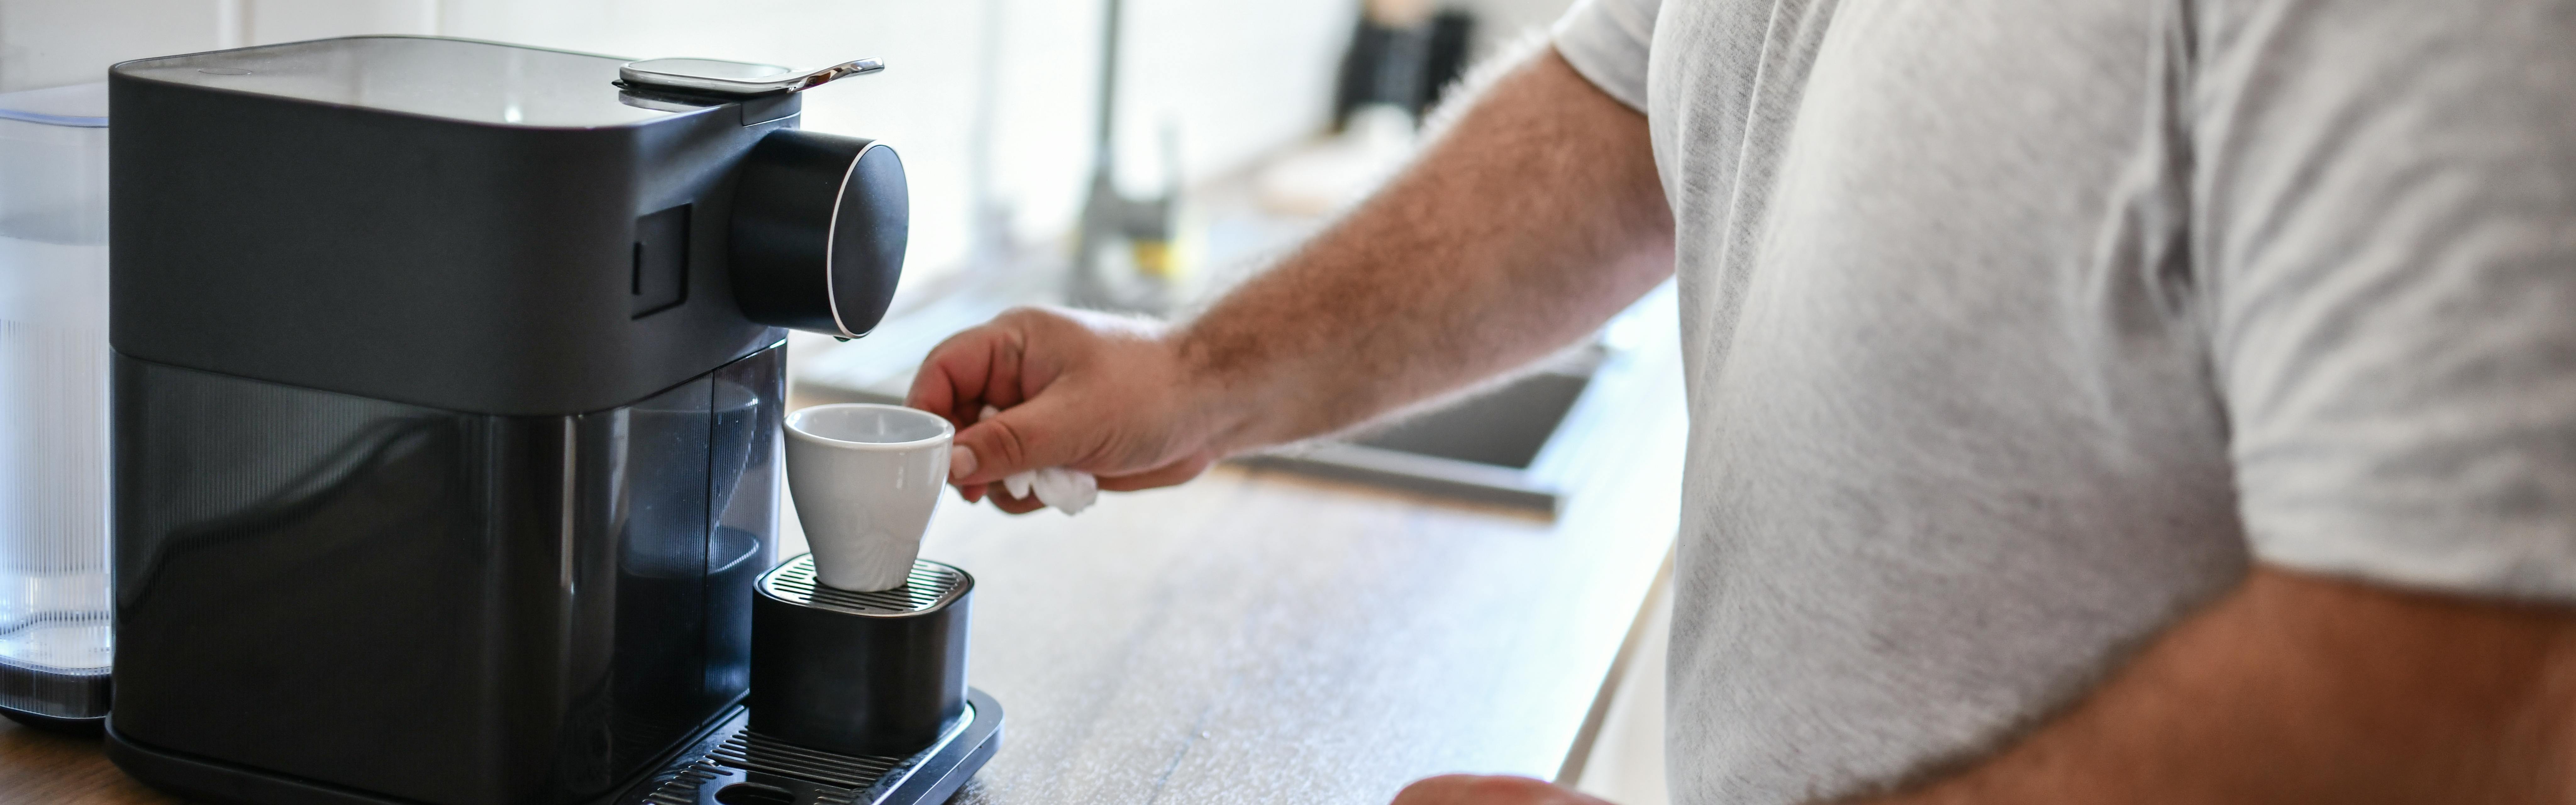 ESPRESSO ESSENTIALS: BASIC TOOLS & GADGETS YOU WILL NEED WITH YOUR ESPRESSO  MACHINE 